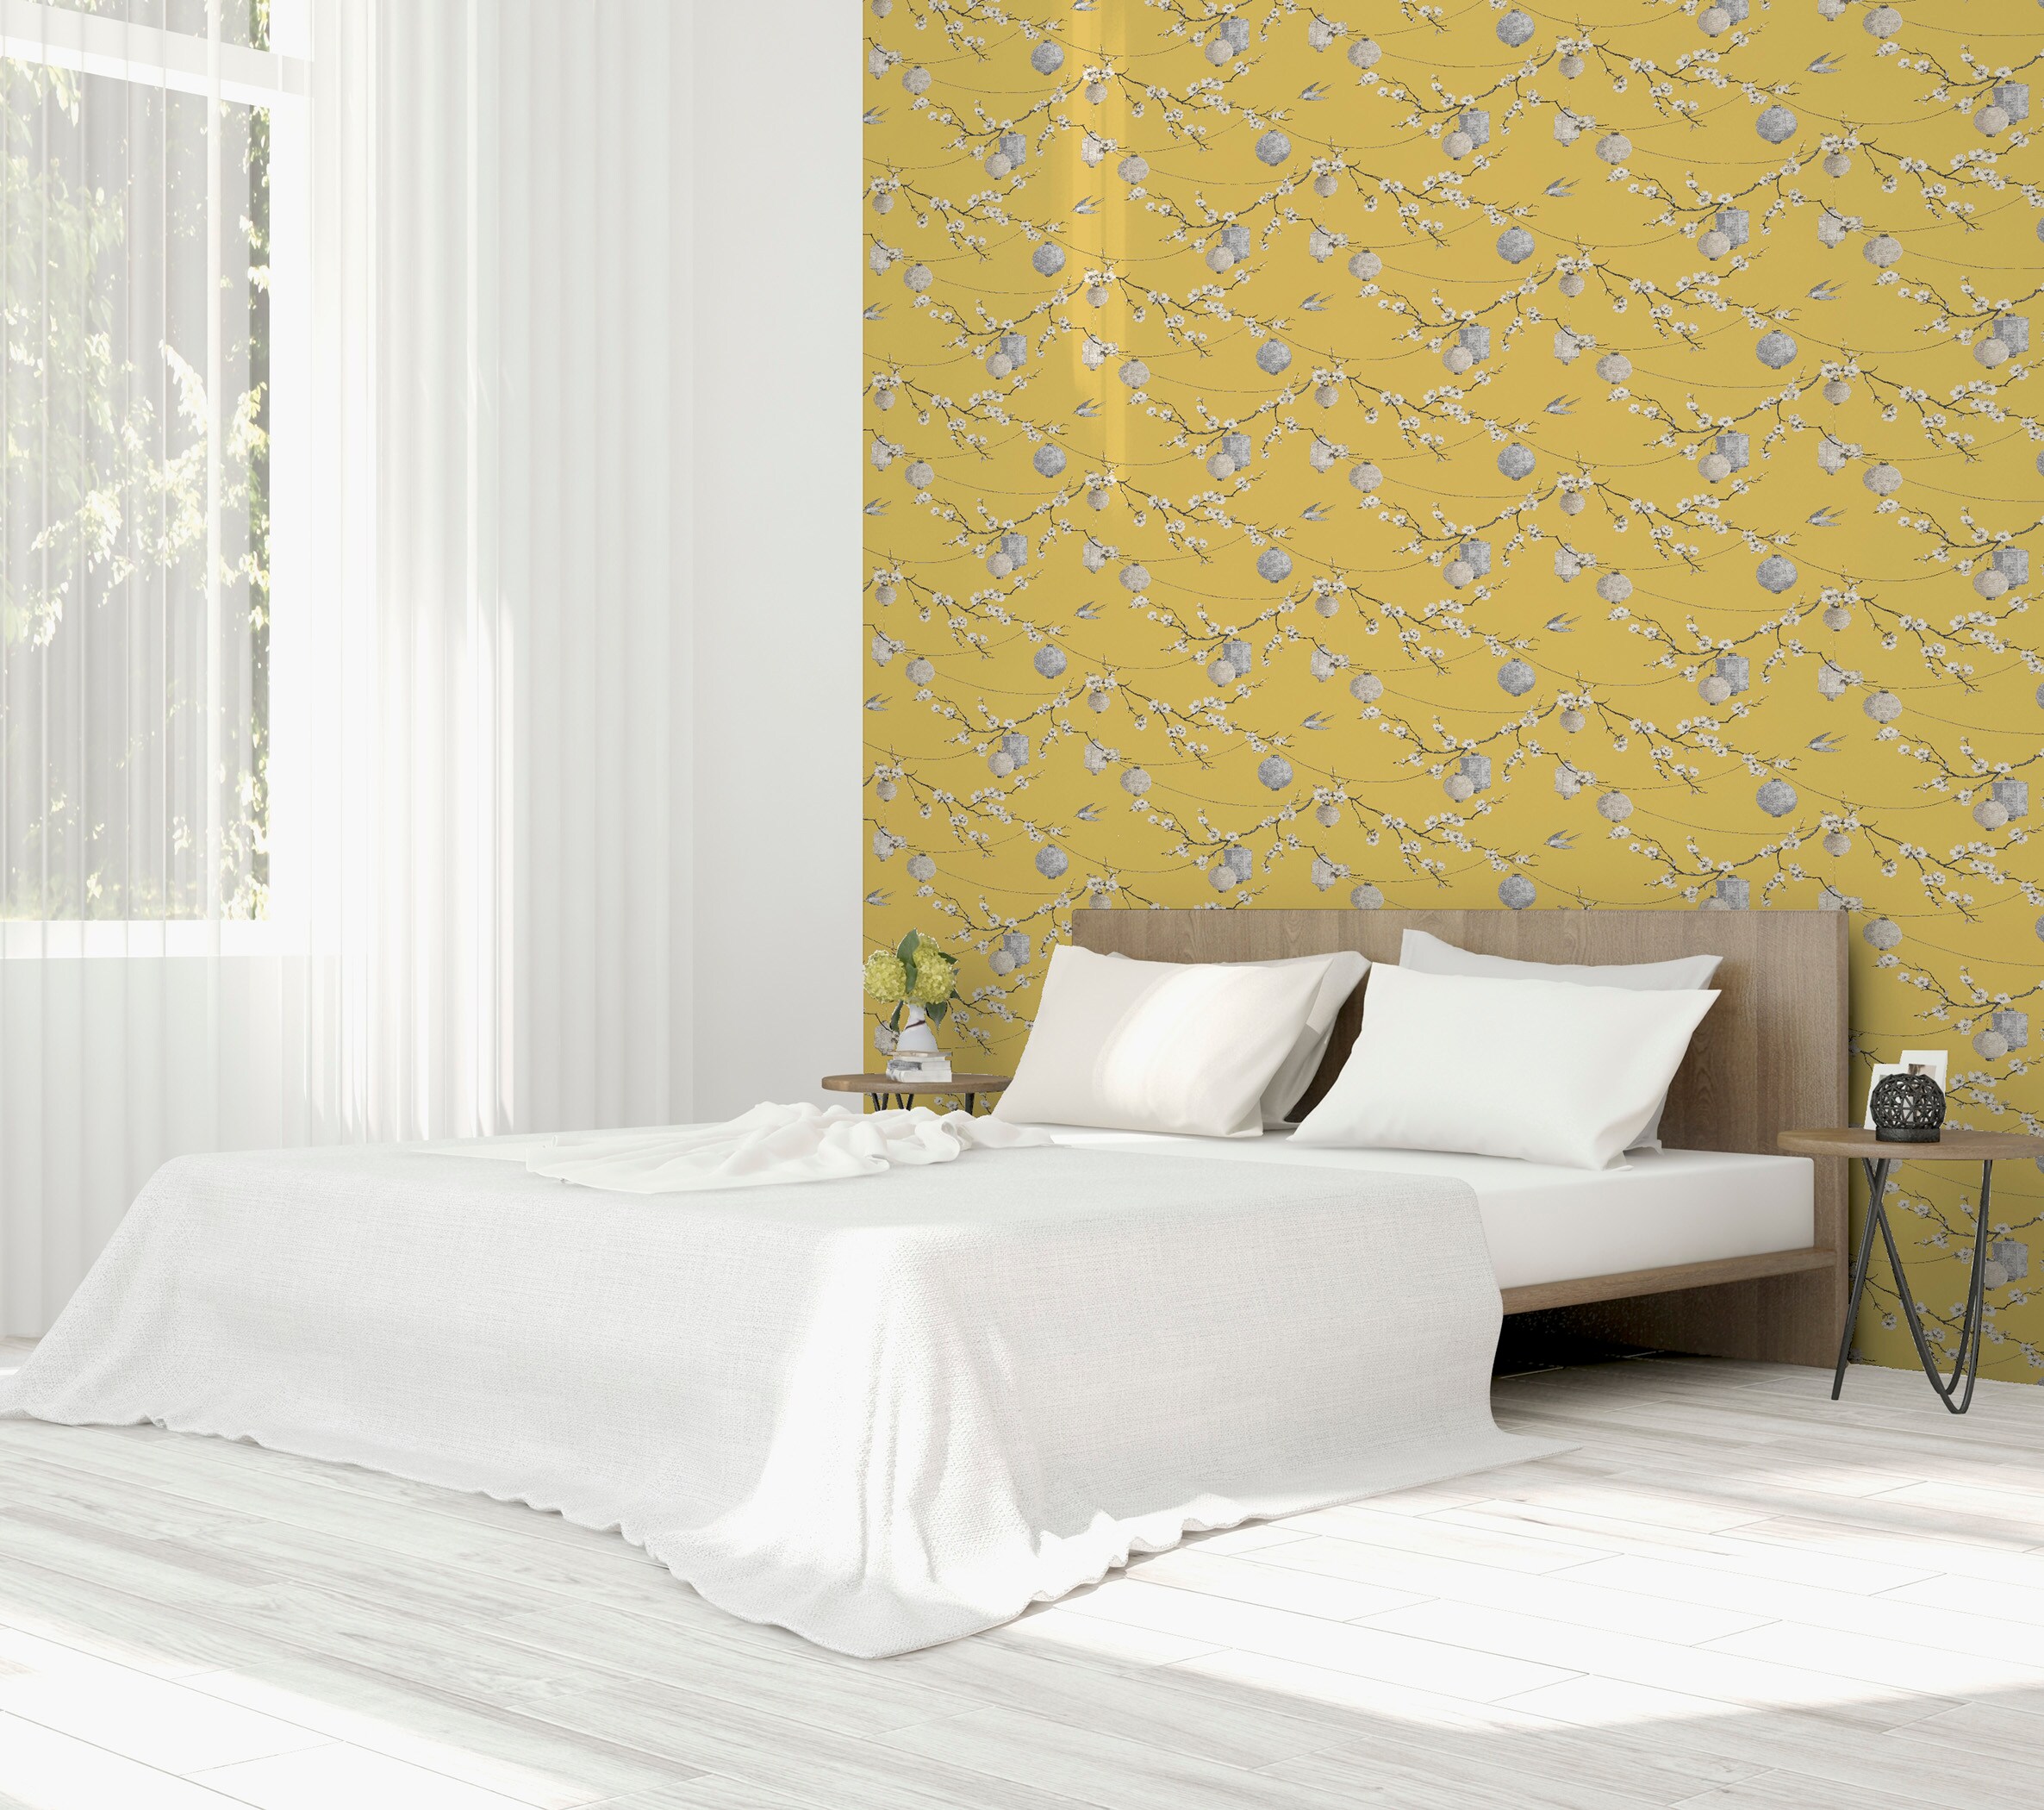 THE CANTONESE GARDEN Wallpaper - Products